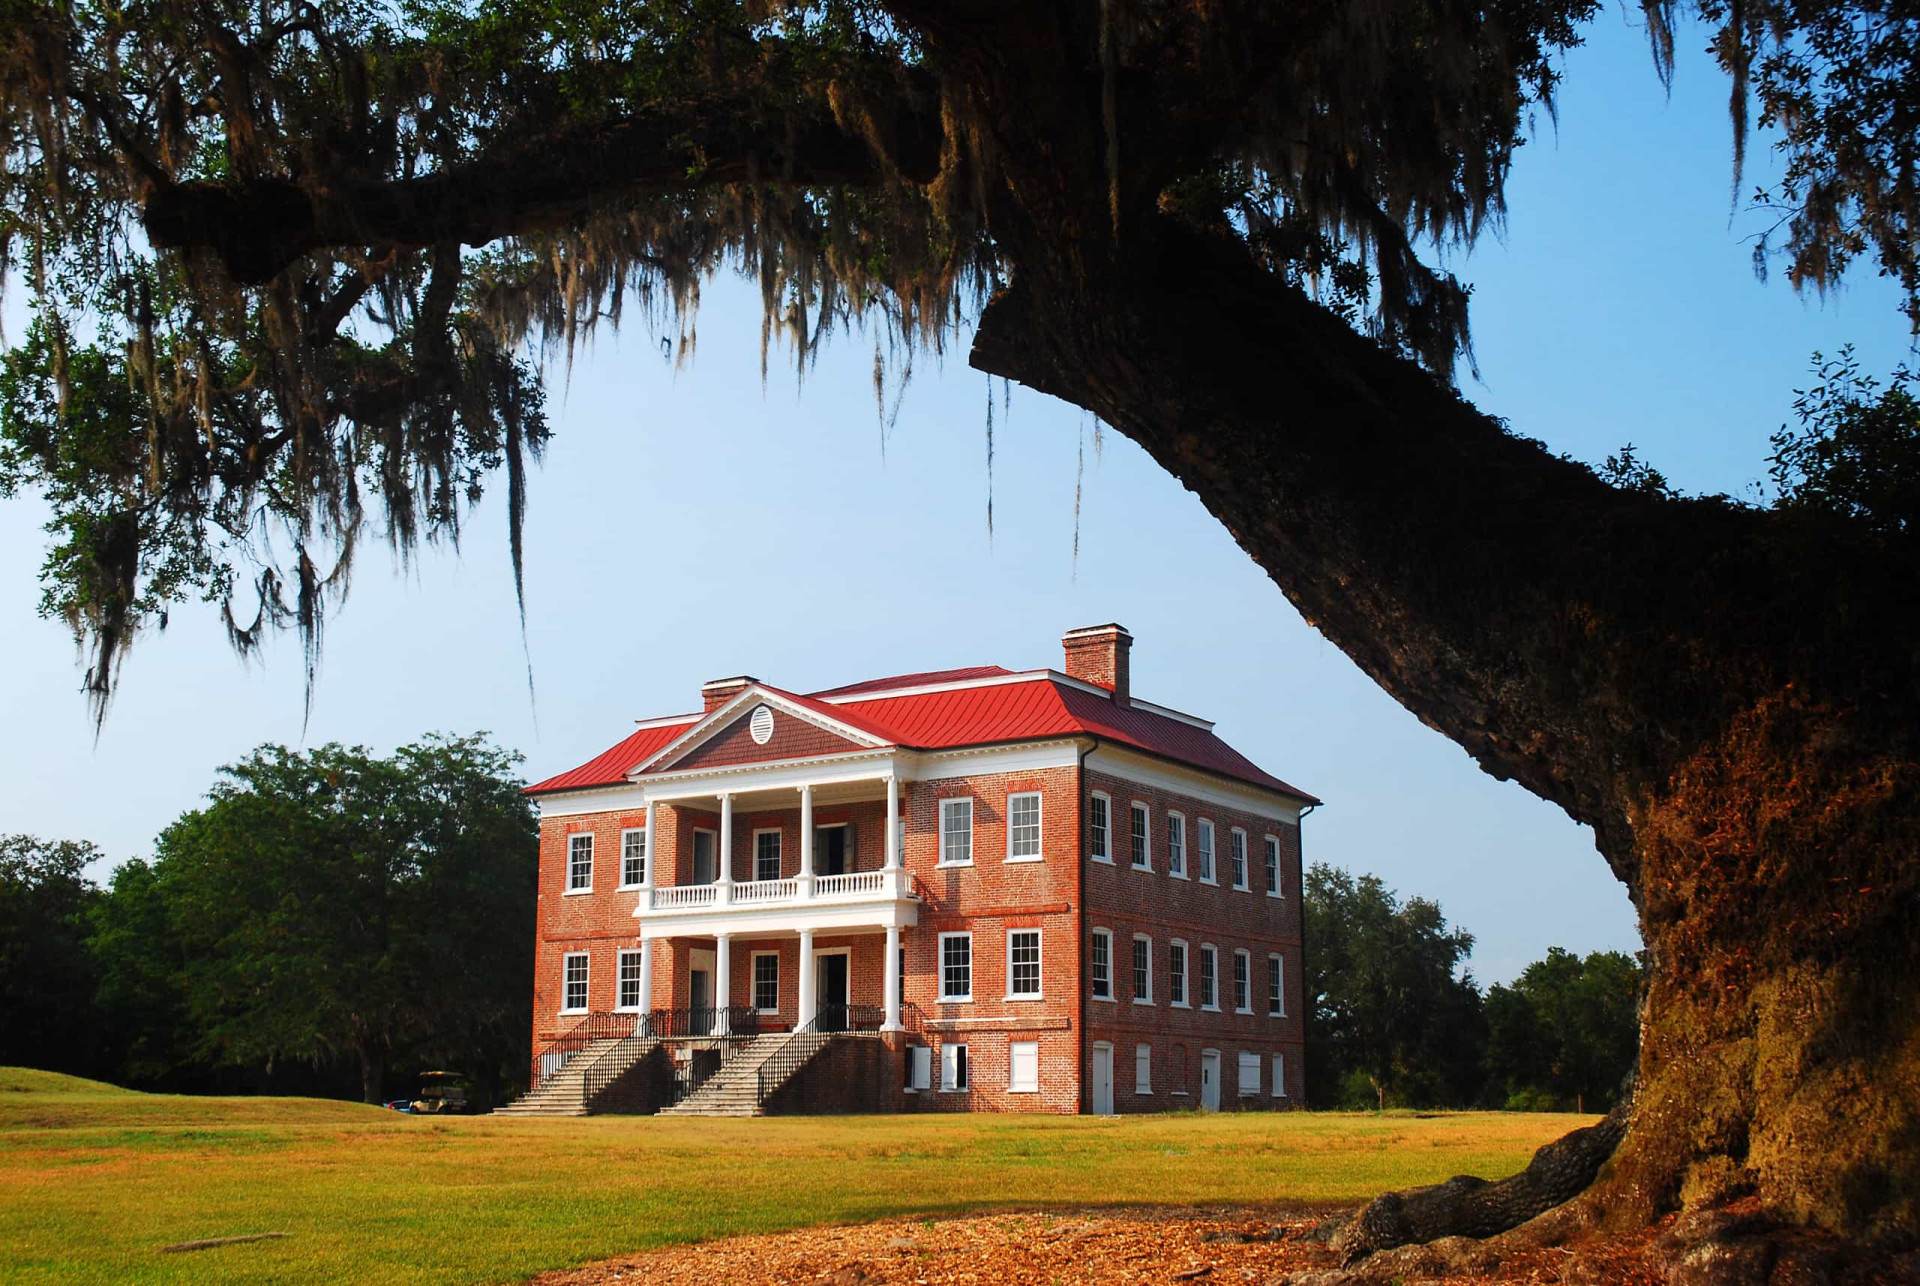 <p>There are more attractive and romantic examples out there, but Drayton Hall remains the oldest unrestored plantation house in America open to the public. It doesn't get more authentic than this.</p><p>You may also like:<a href="https://www.starsinsider.com/n/441638?utm_source=msn.com&utm_medium=display&utm_campaign=referral_description&utm_content=198095v22en-en"> These celebrities all became politicians</a></p>